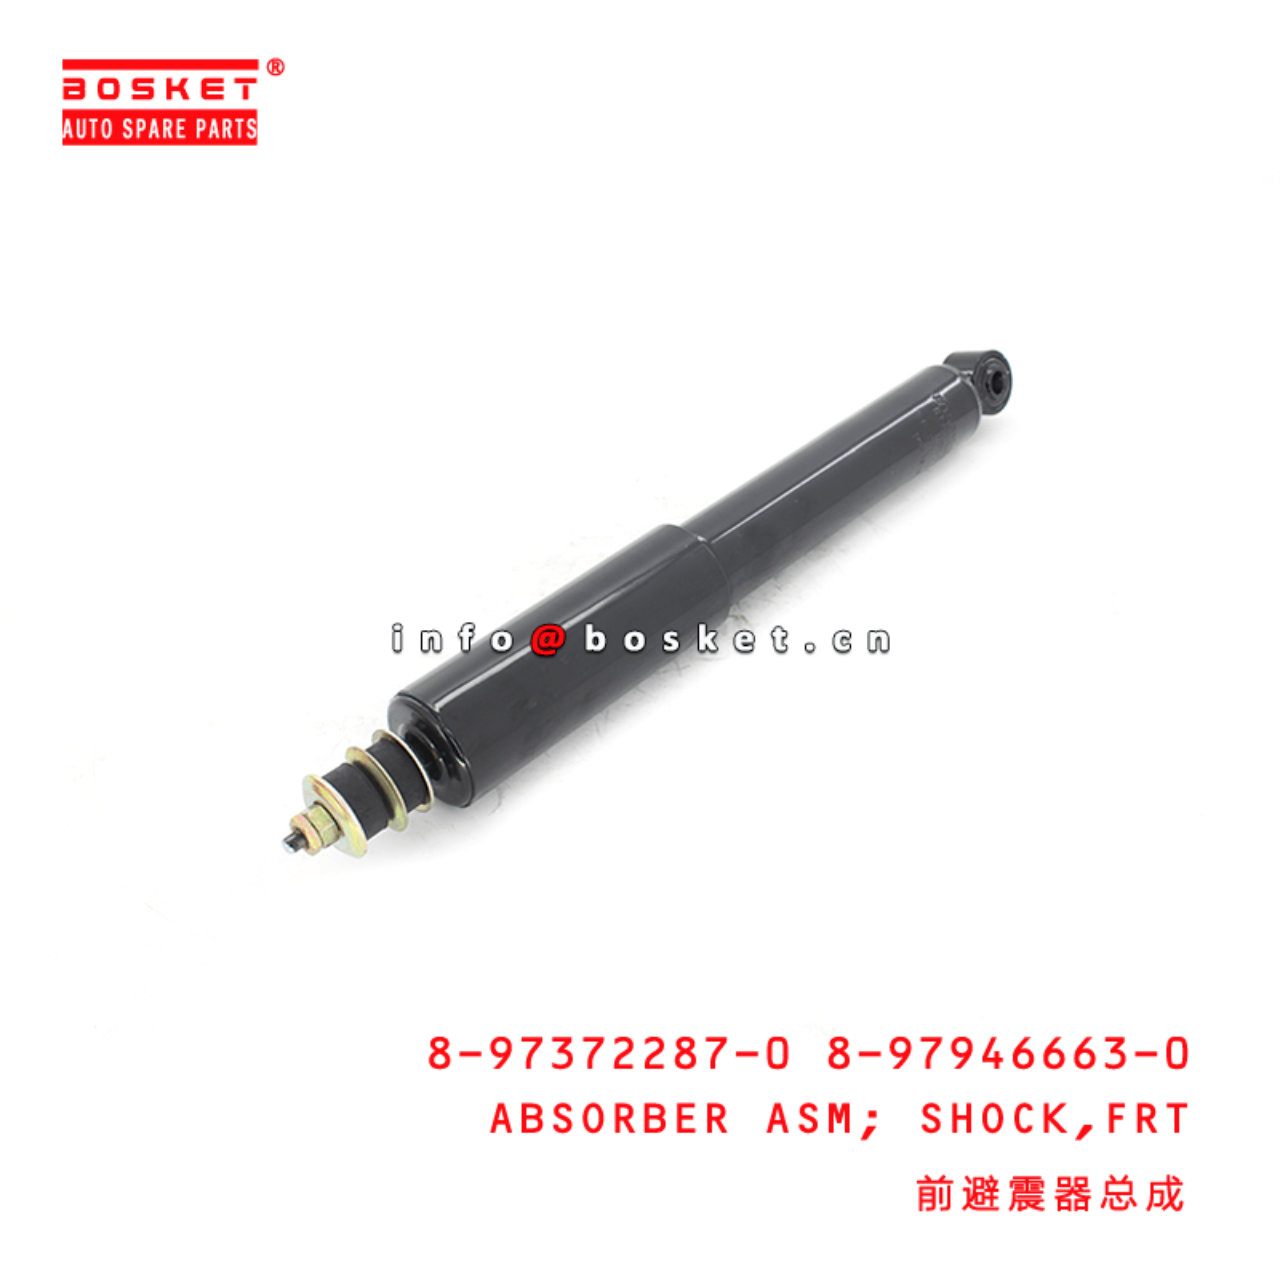 8-97372287-0 8-97946663-0 Front Shock Absorber Assembly 8973722870 8979466630 Suitable for ISUZU D-M